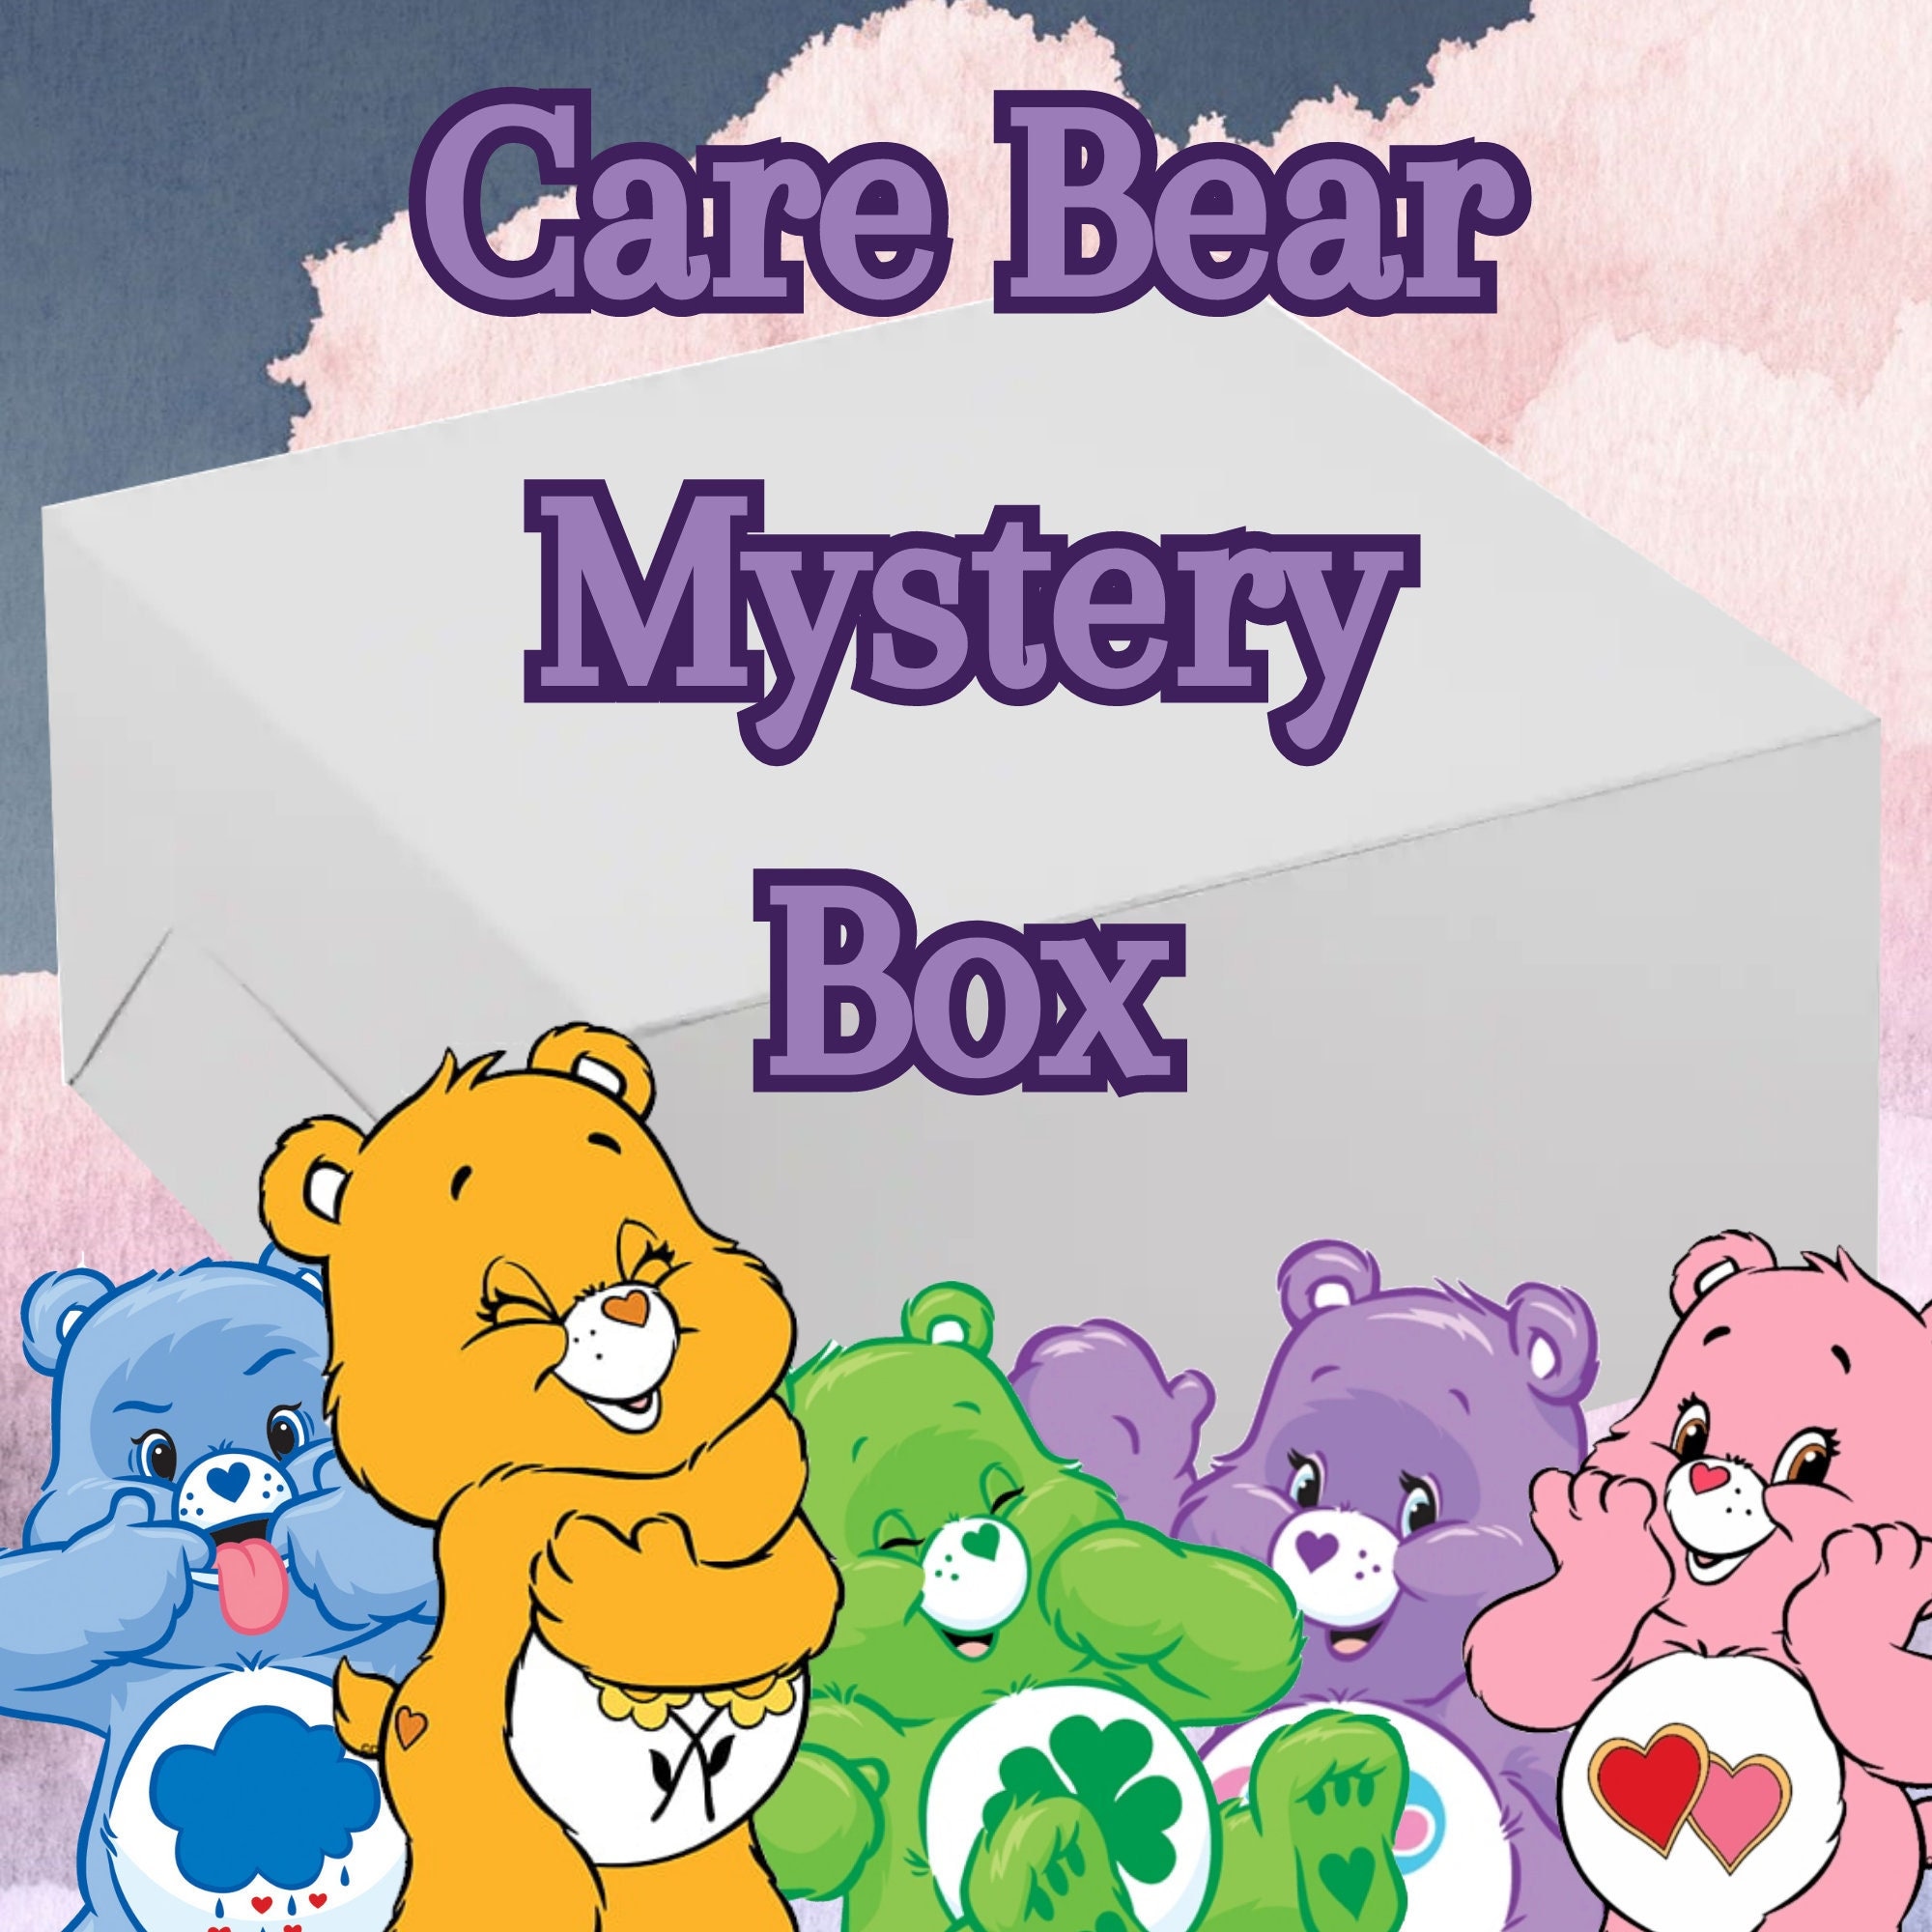 Care Bears Cake Topper/ Care Bears Party Decorations/ Care Bears Birthday 